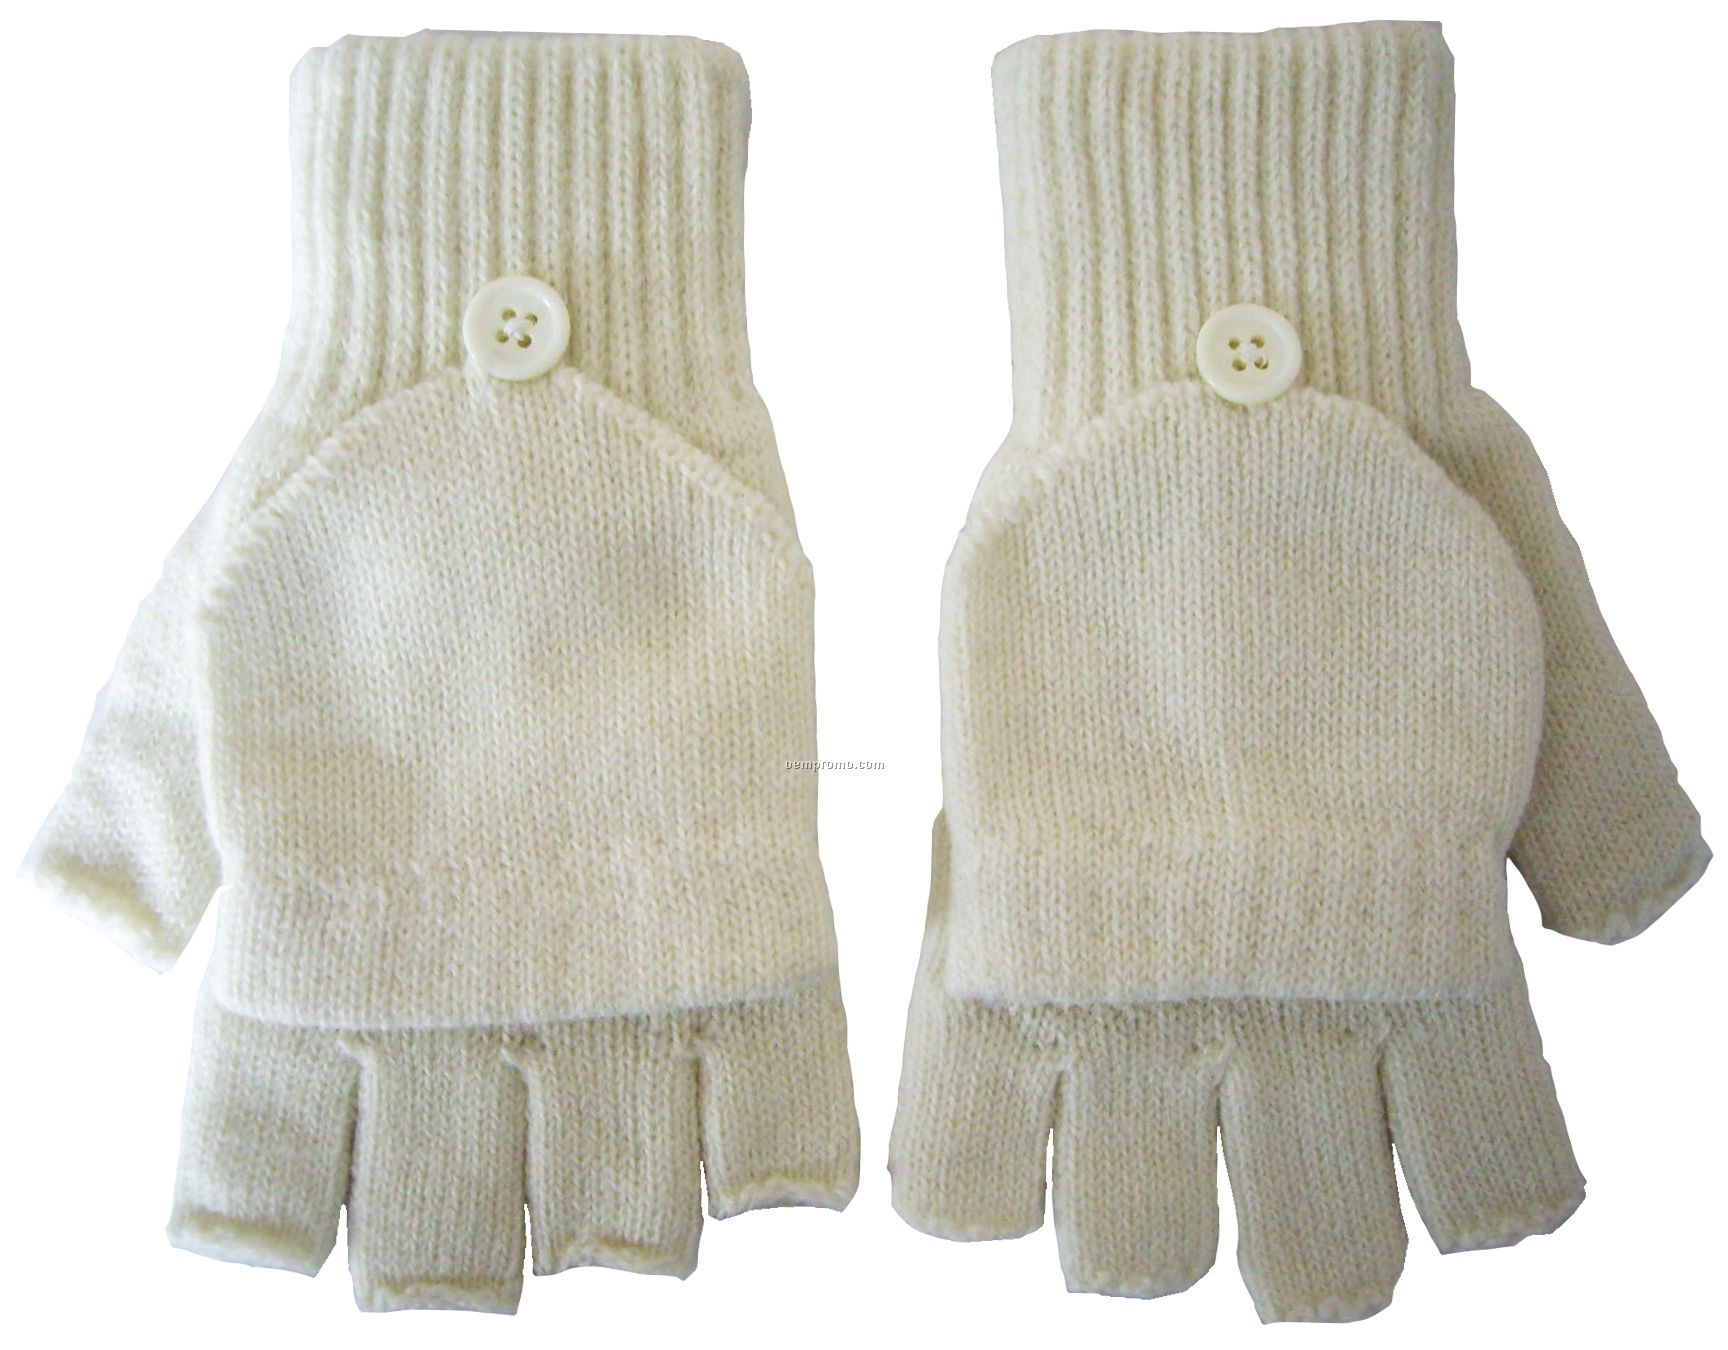 Fingerless Gloves With Cap Cover (Overseas 6-7 Week Delivery)